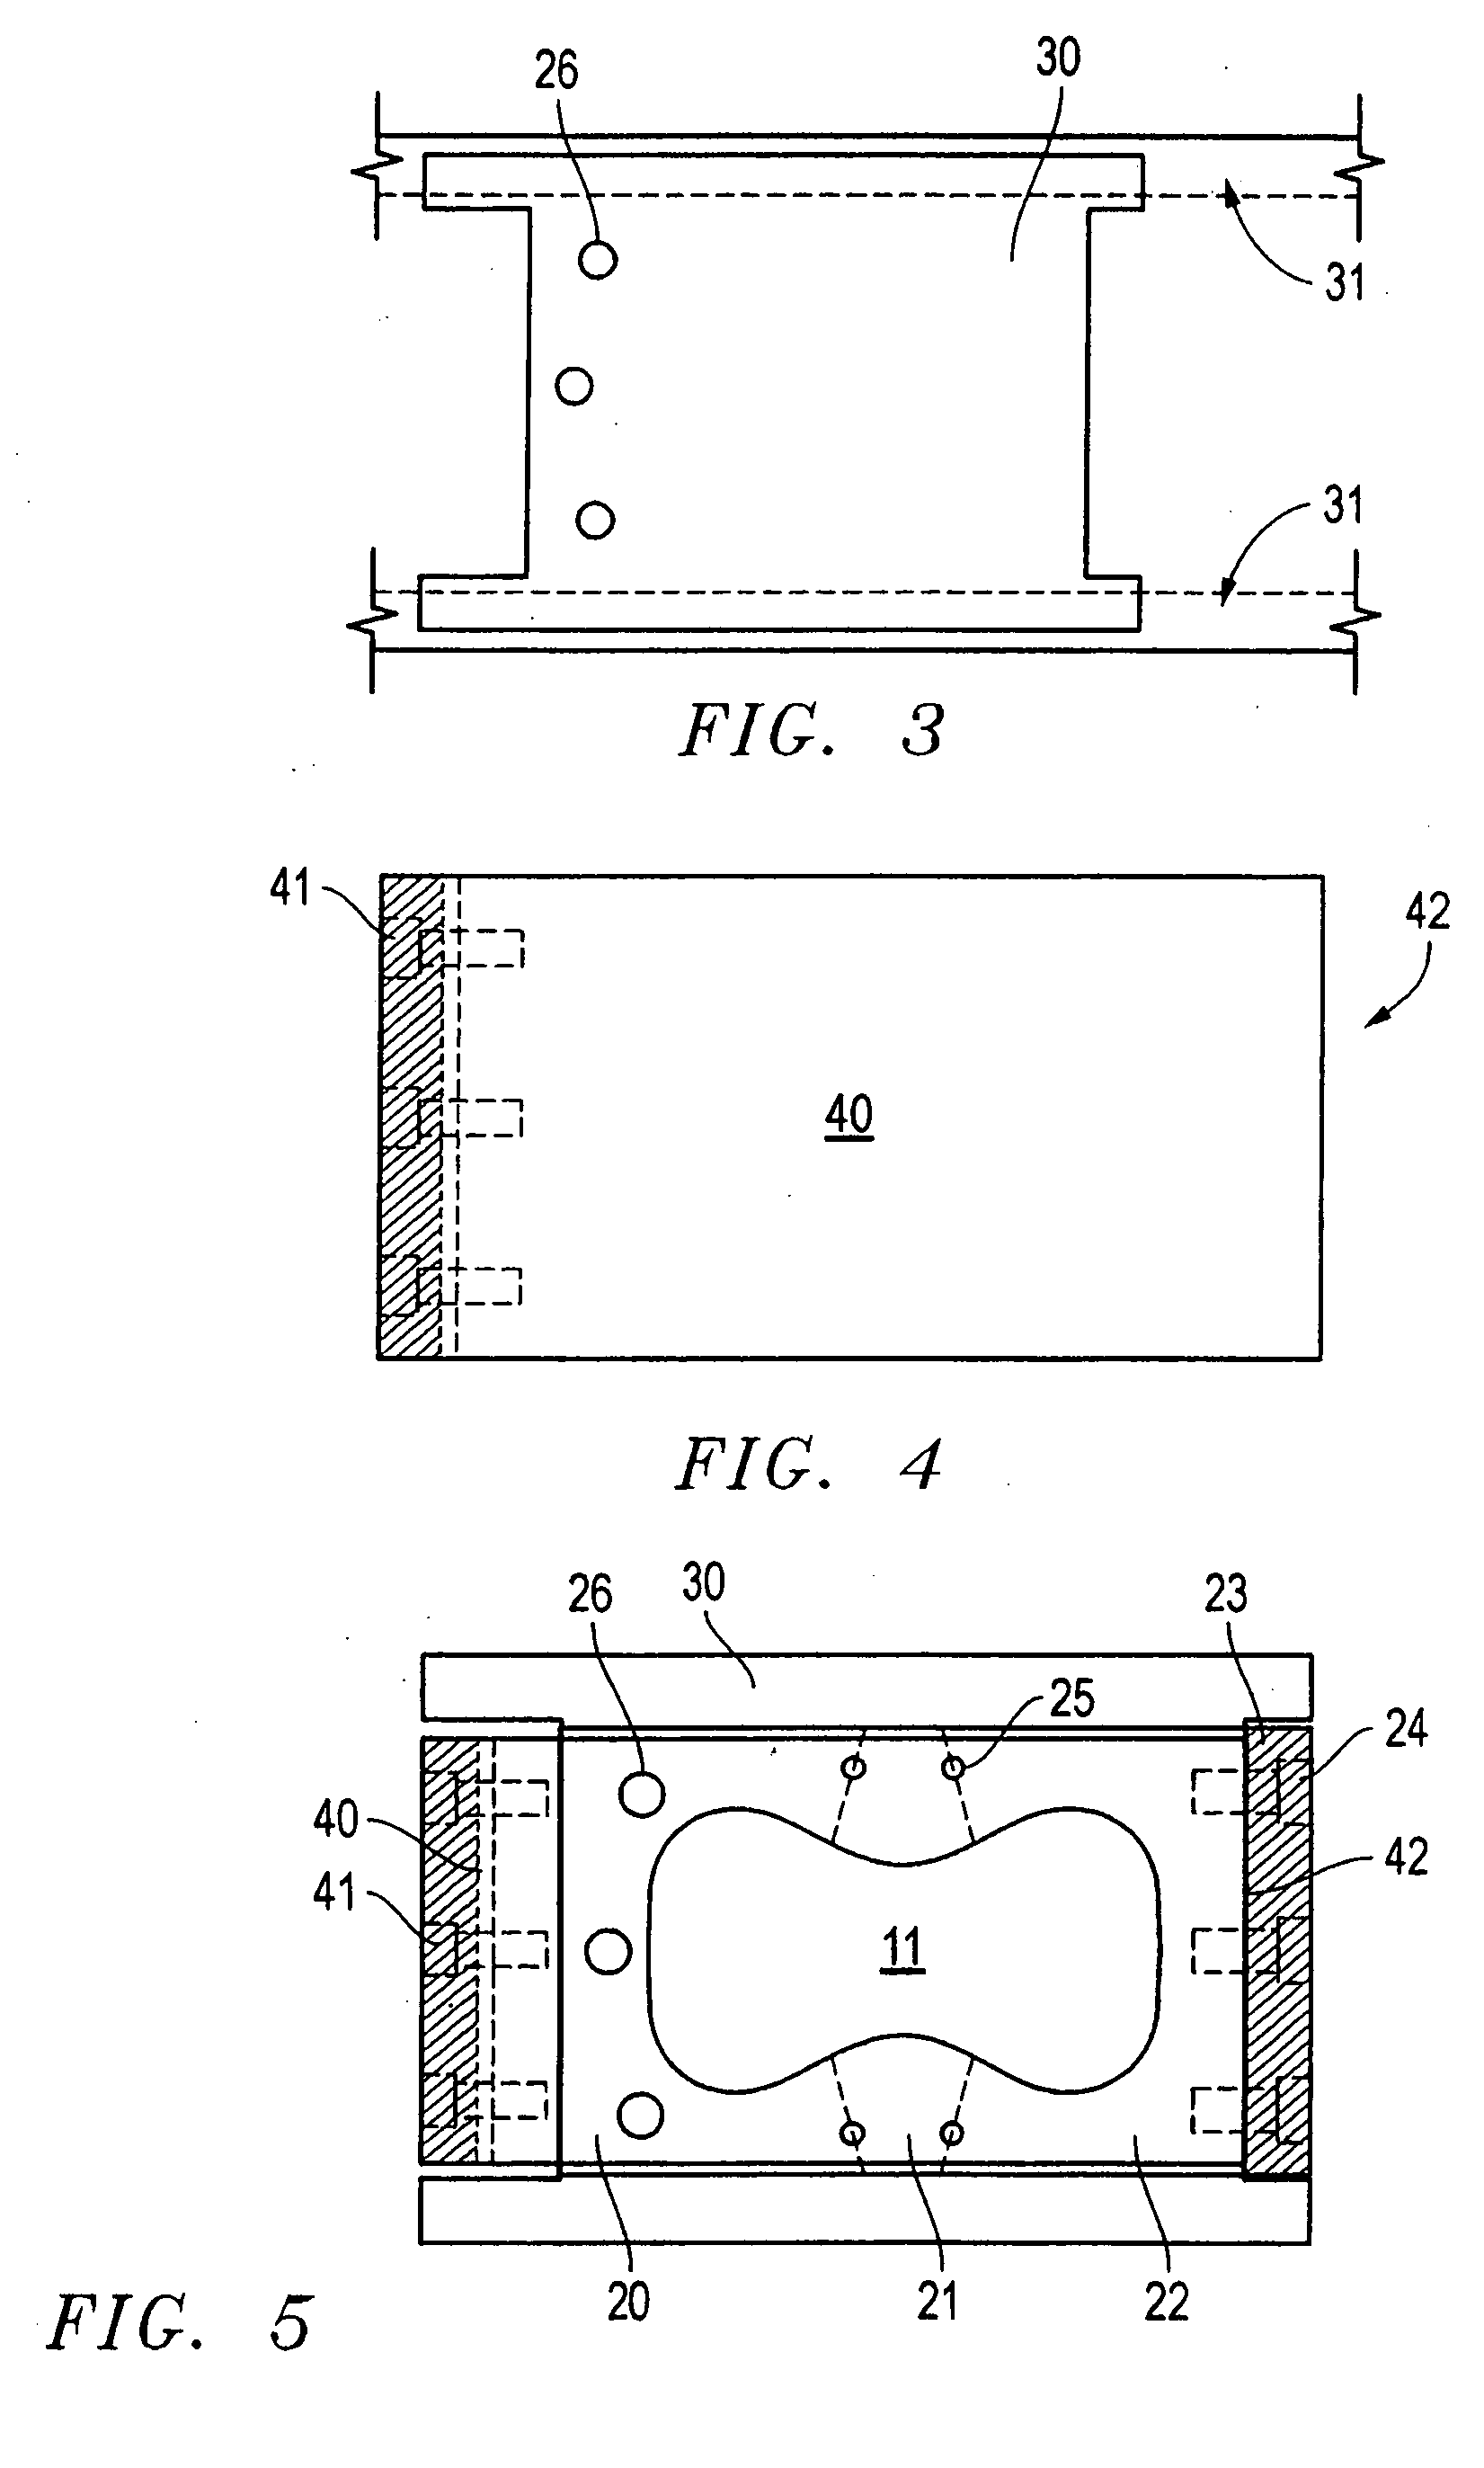 Testing apparatus and method of deriving young's modulus from tensile stress/strain relationships